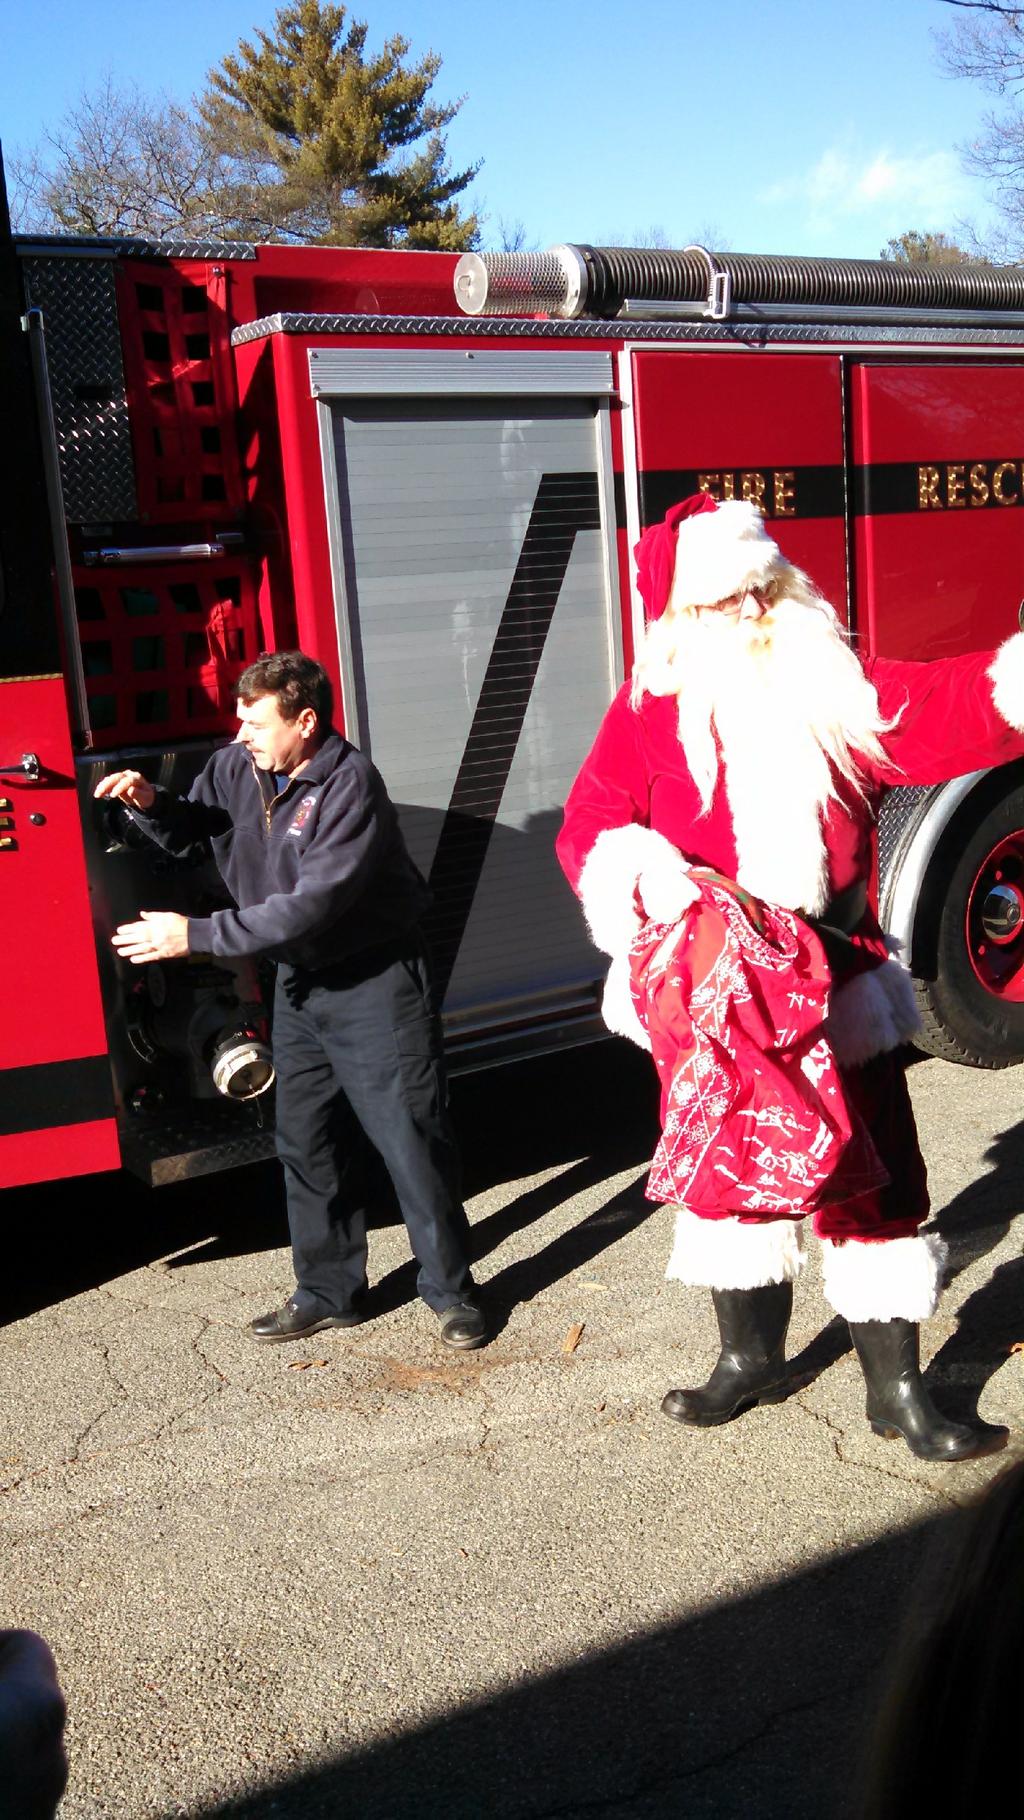 Kids enjoy games and food before receiving a gift from Santa. Santa Clause will have a grand arrival by fire truck at at 1:00pm.